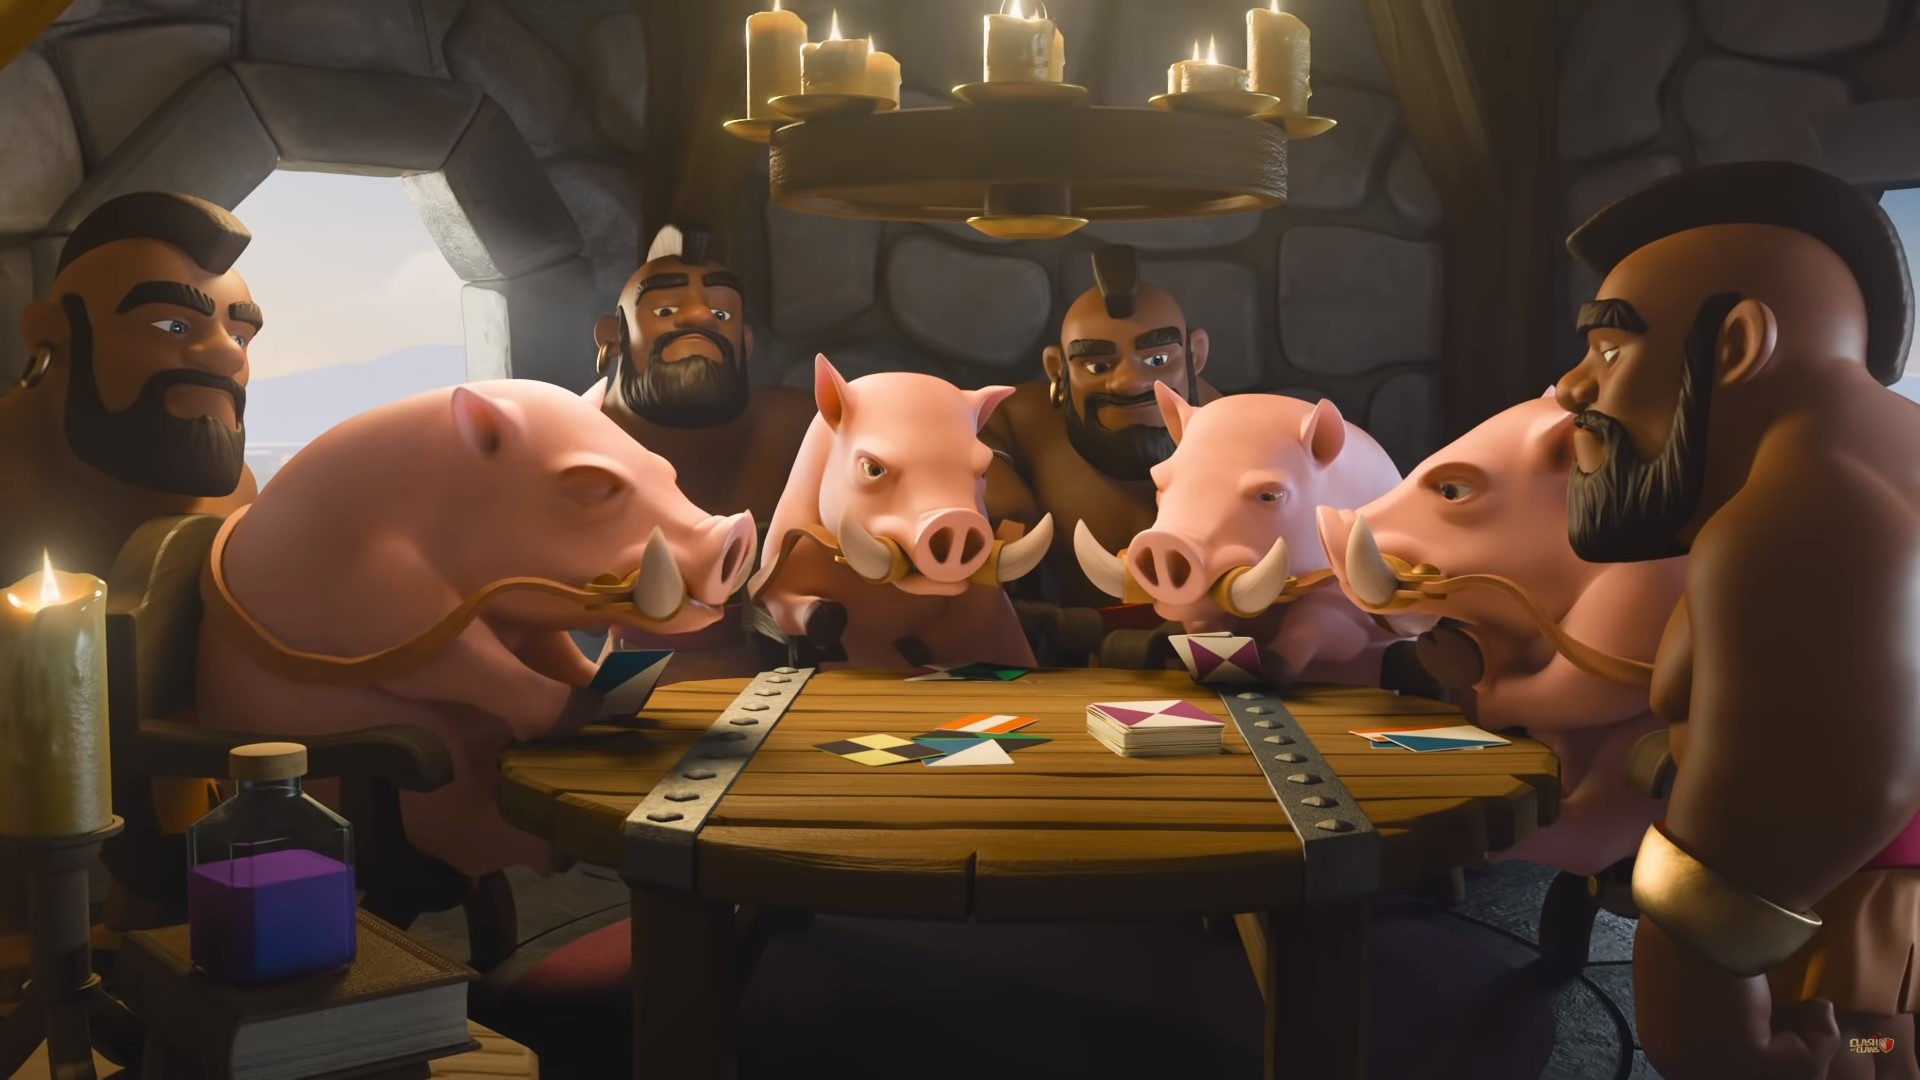 Best mobile multiplayer games: Clash of Clans. Image shows a bunch of people and pigs sitting around a table.